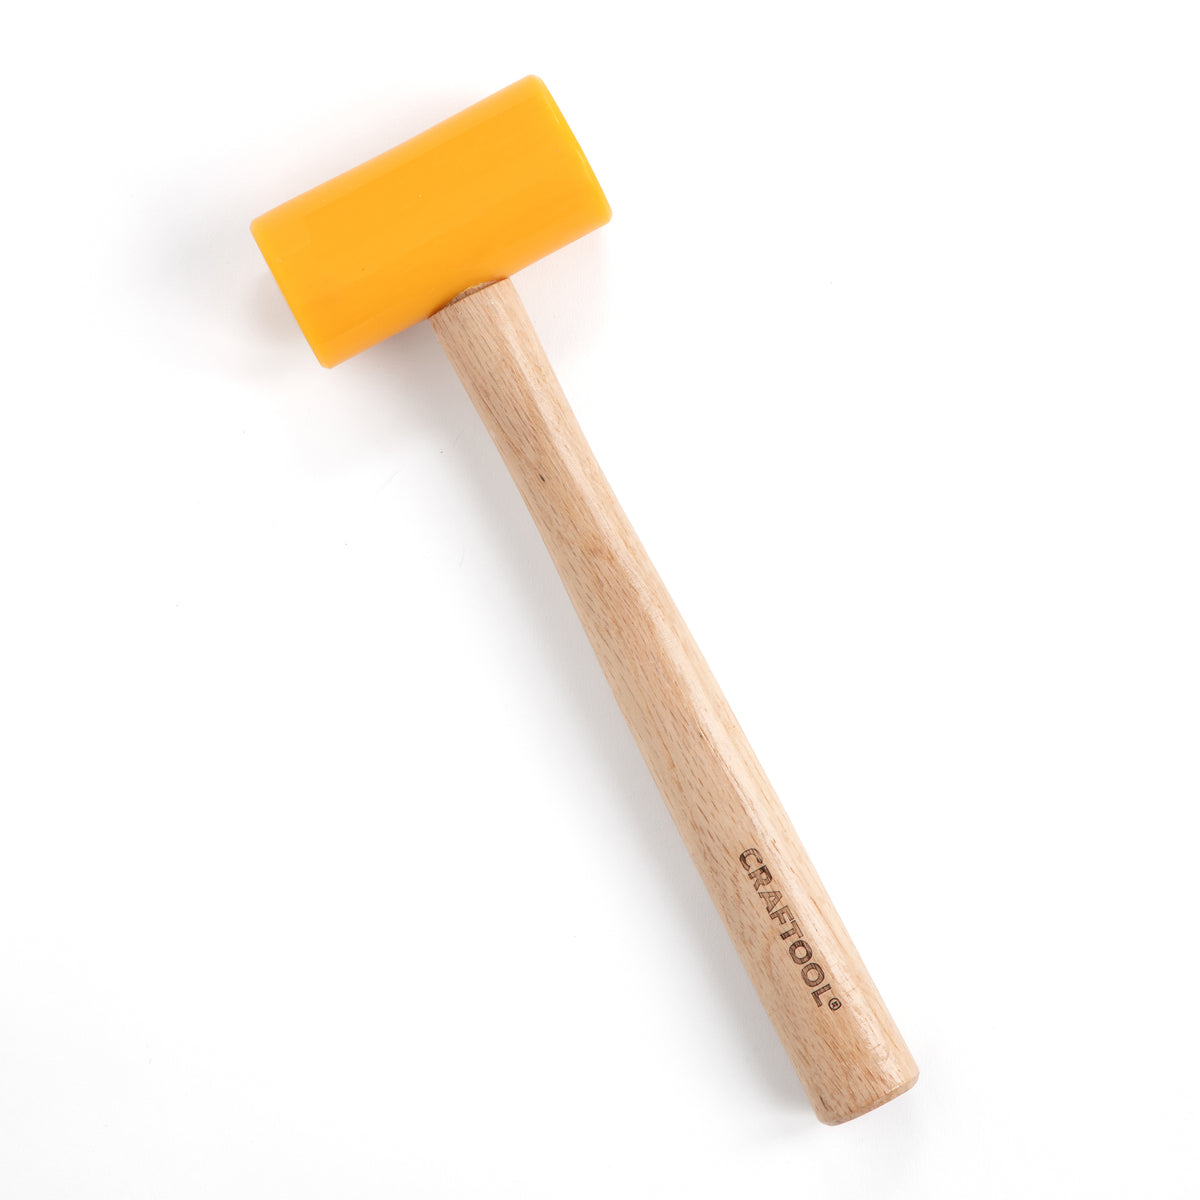 Leather Factory Poly Mallet, 11 inch Handle, 3.5 inch x 1.5 inch Head